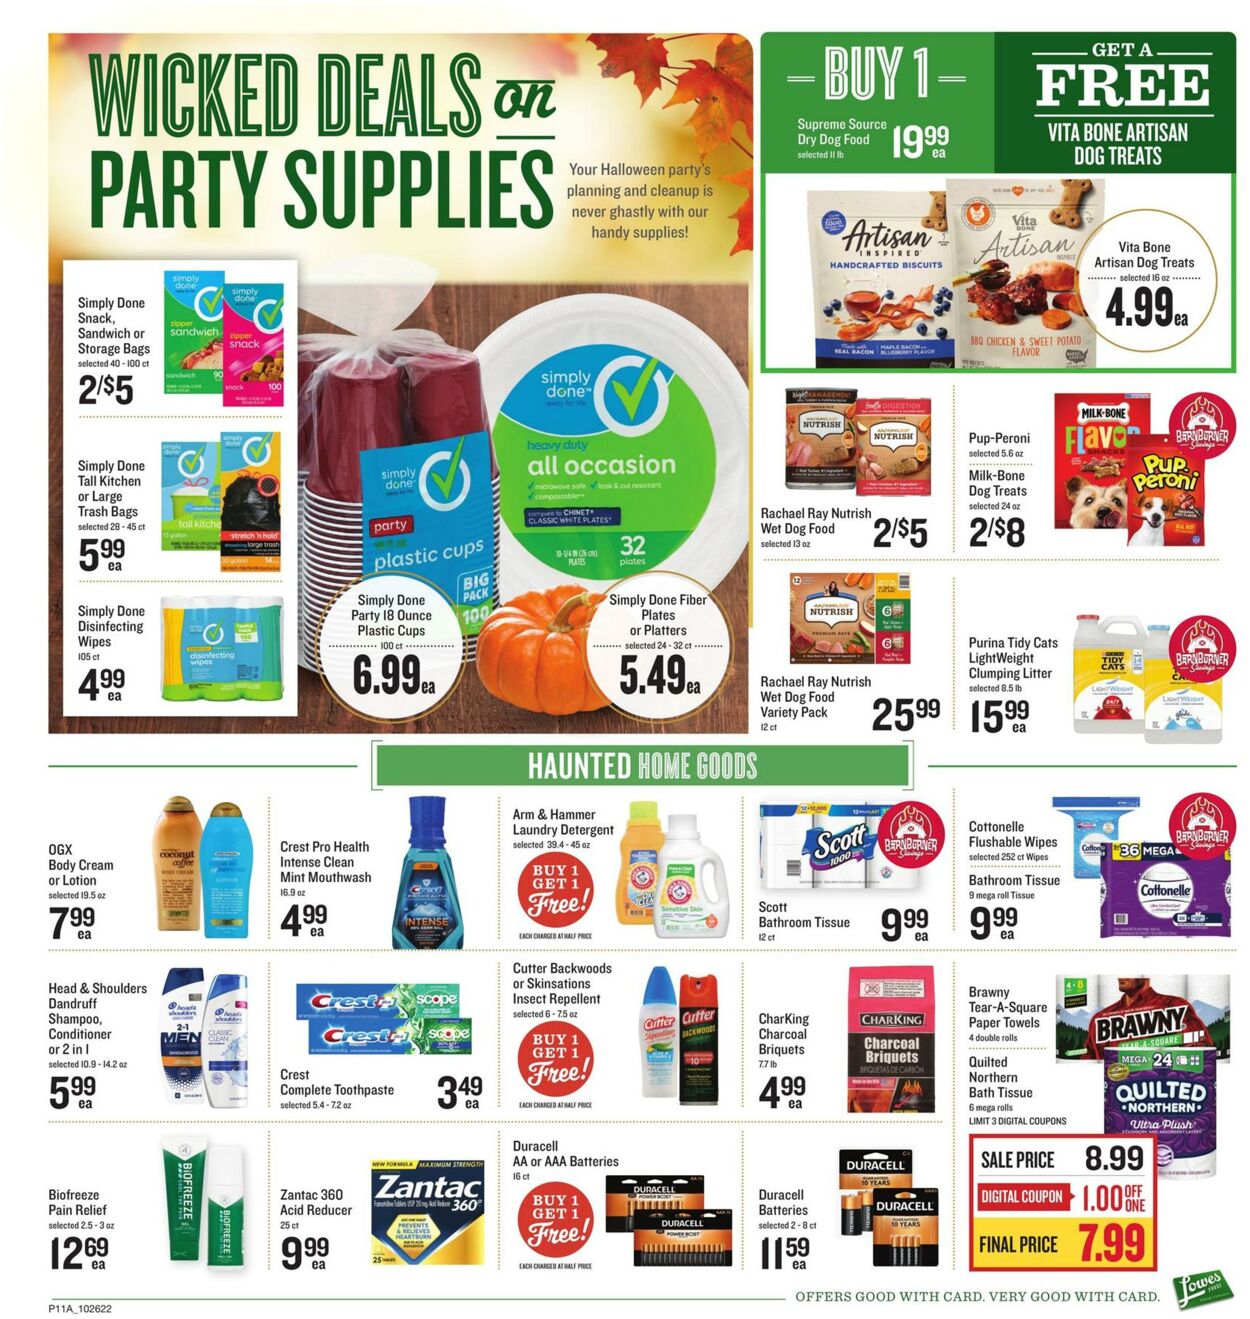 Weekly ad Lowes Foods 10/26/2022 - 11/01/2022